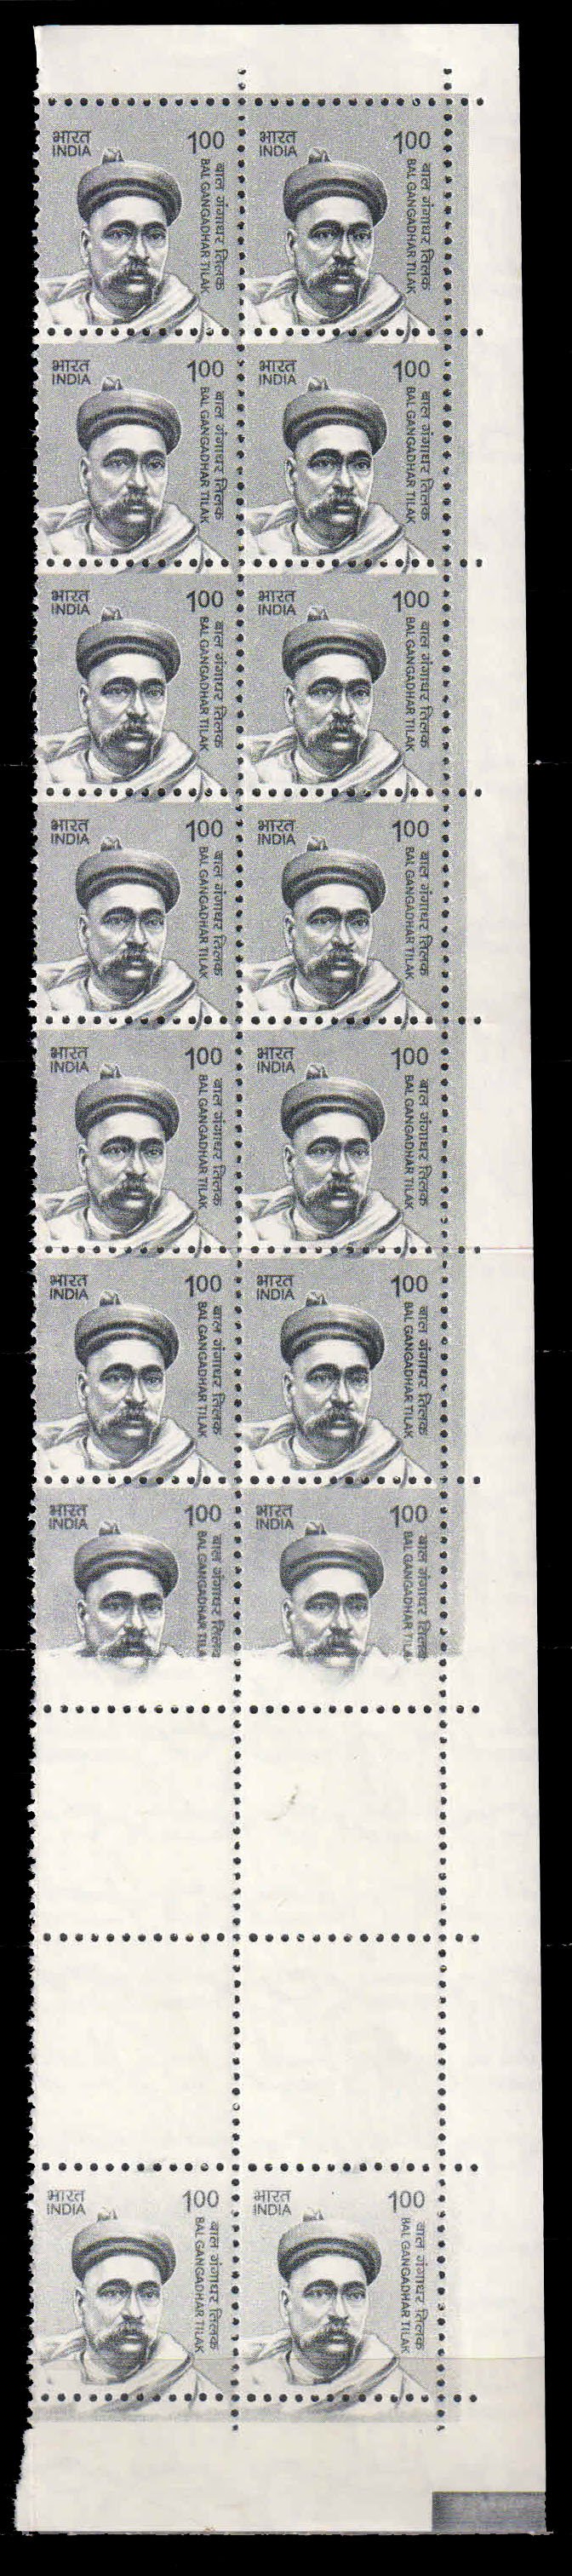 INDIA 1 Re. Definitive-Vertical Block of 20-4 Stamps without design (impression)-Error, Dry Print, MNH, As Per Scan